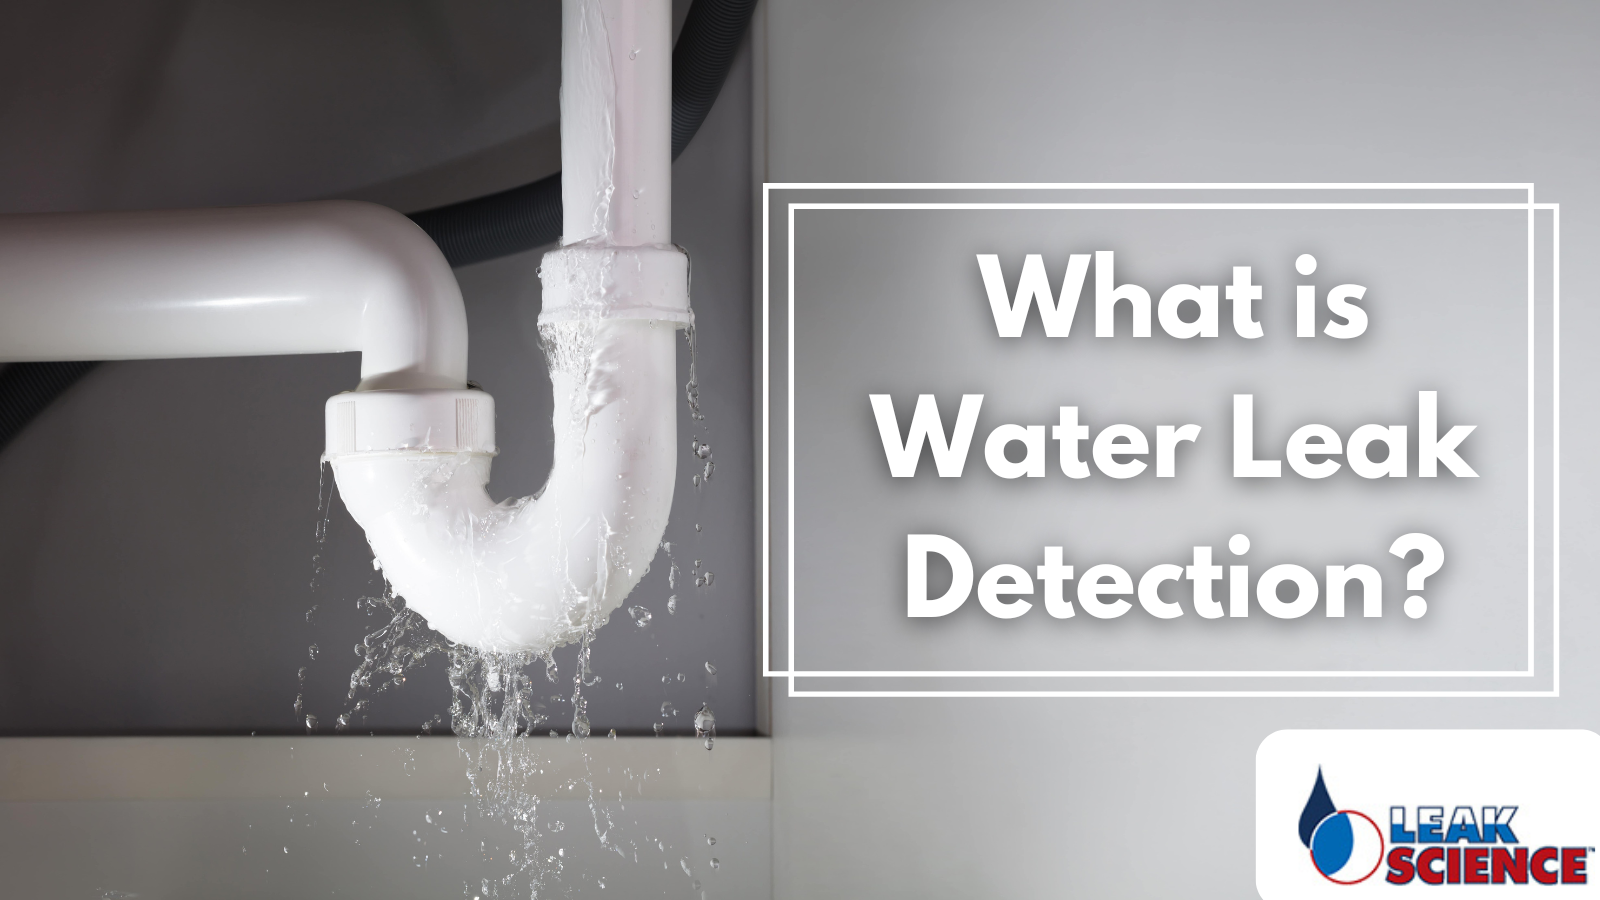 What is water leak detection